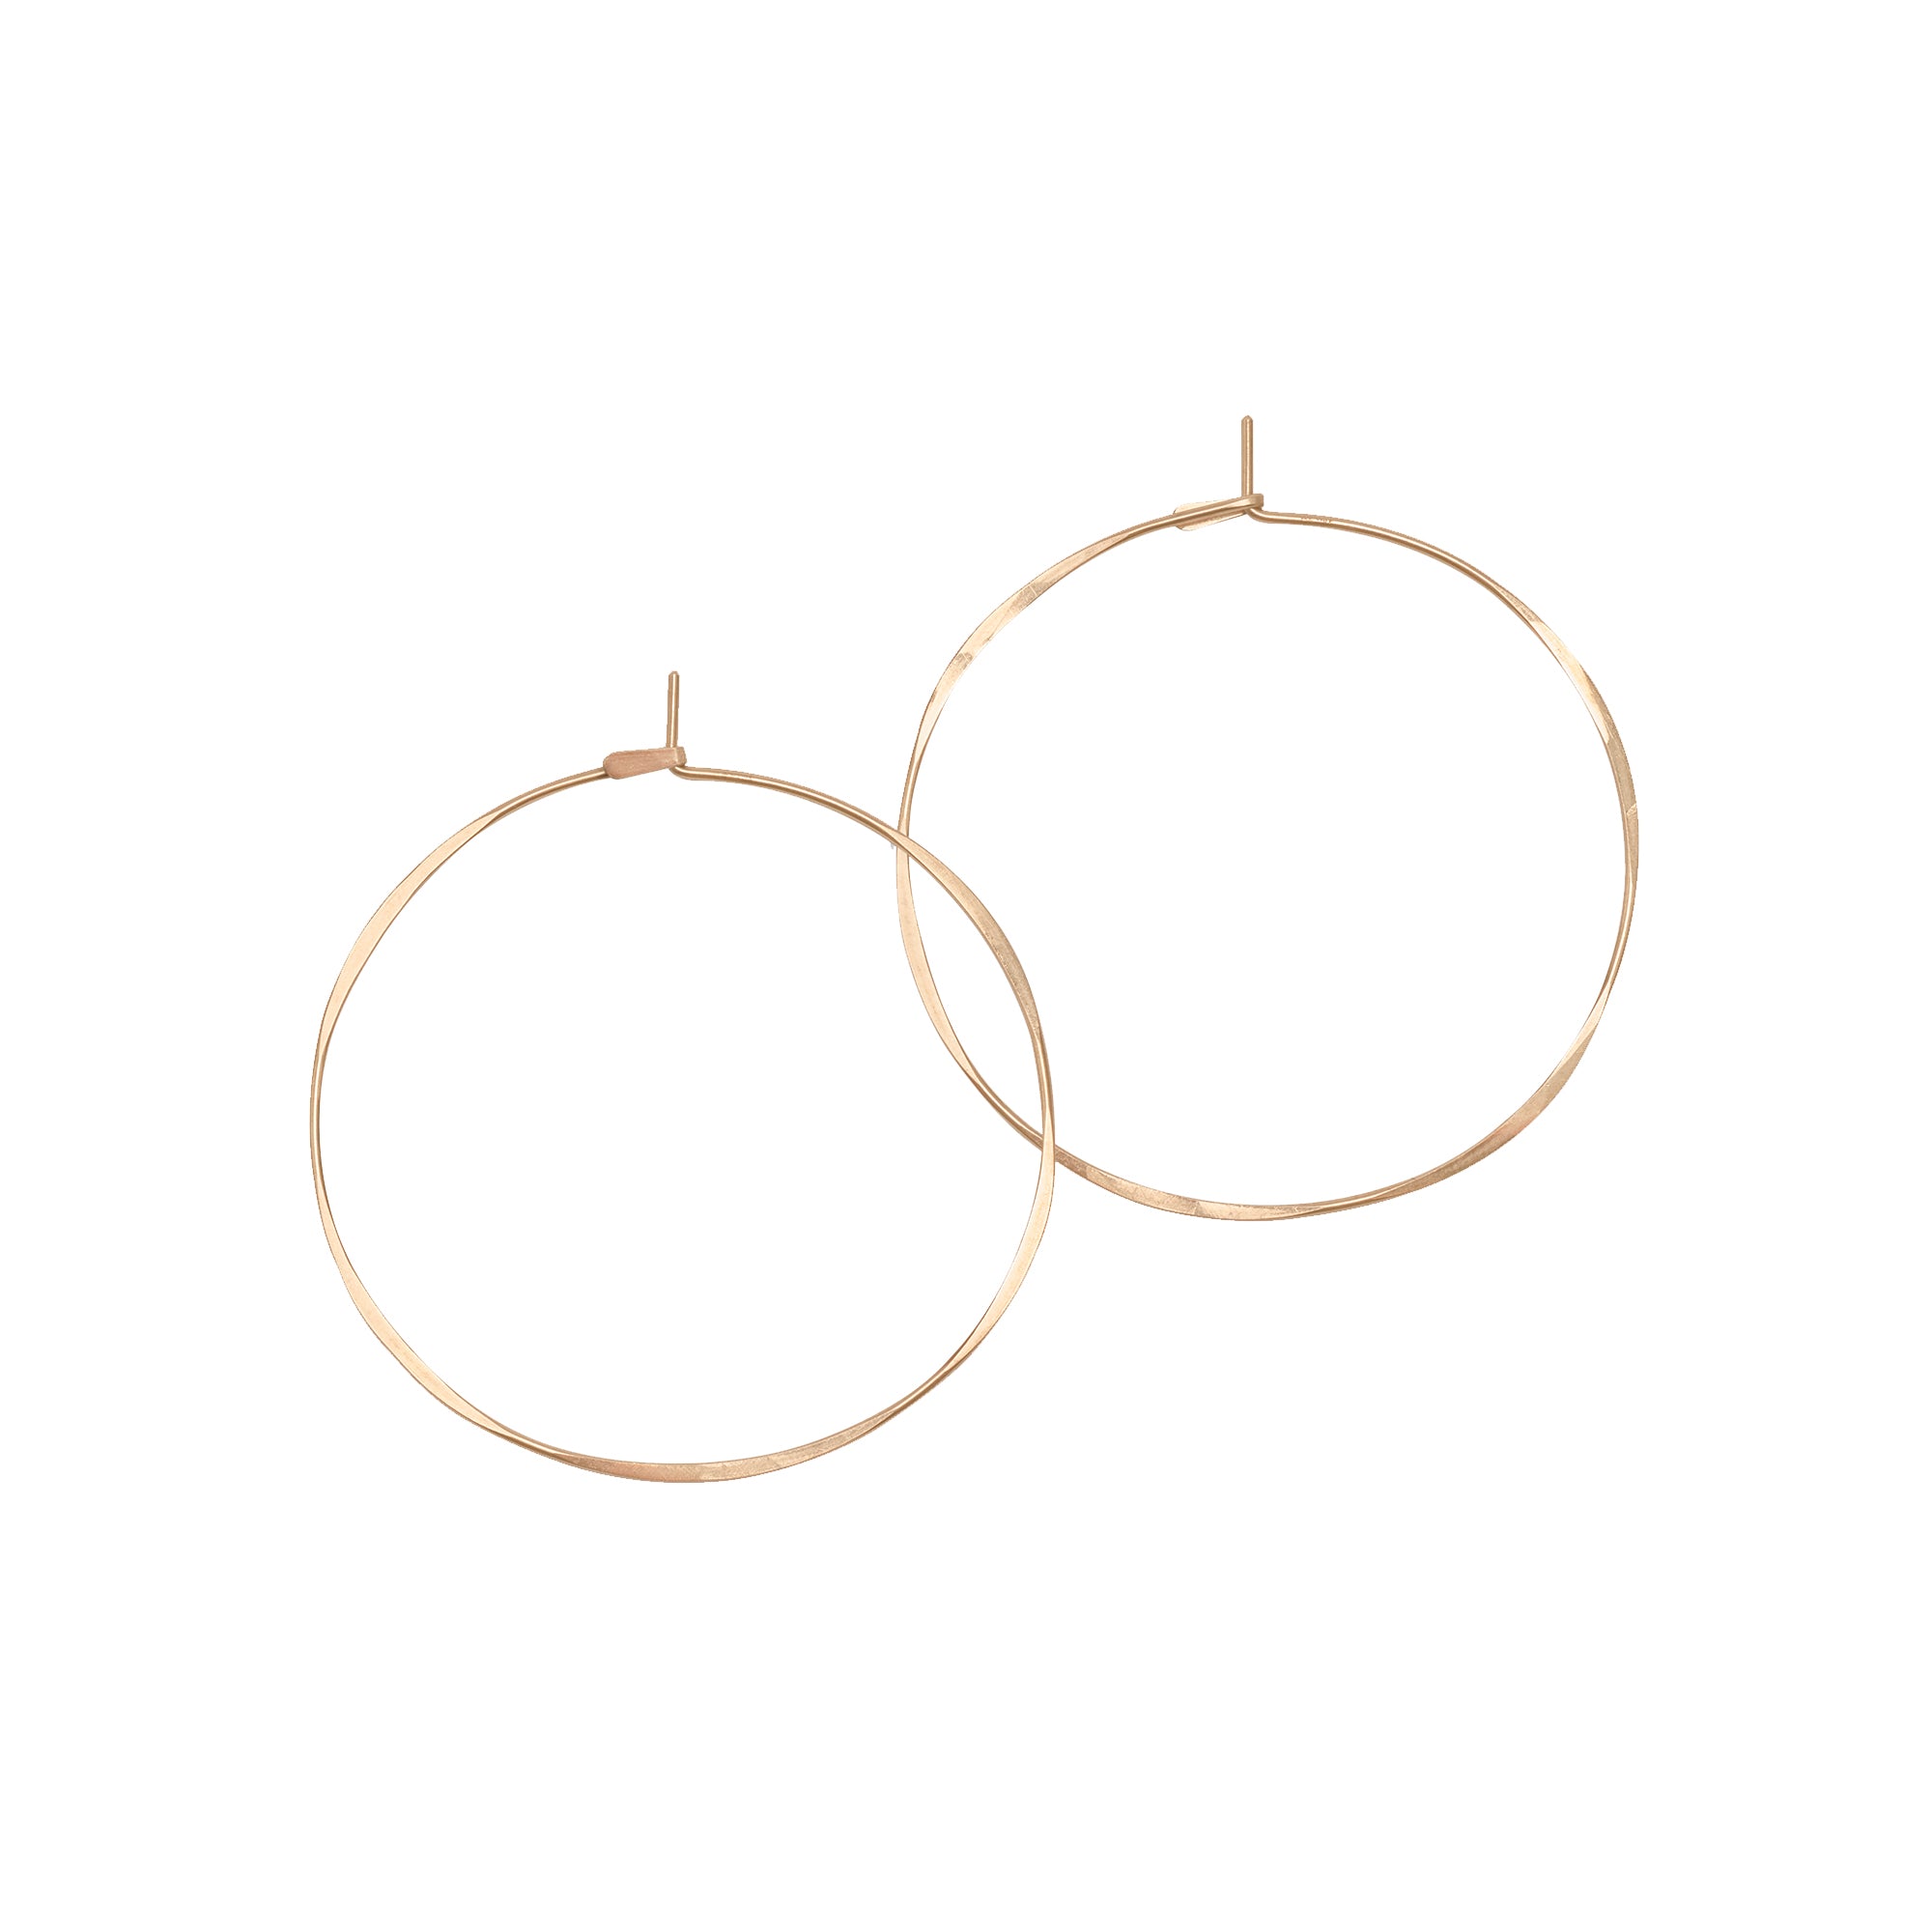 Classic Round Hoops in 14k gold, featuring an organic, hammered texture and quality craftsmanship.